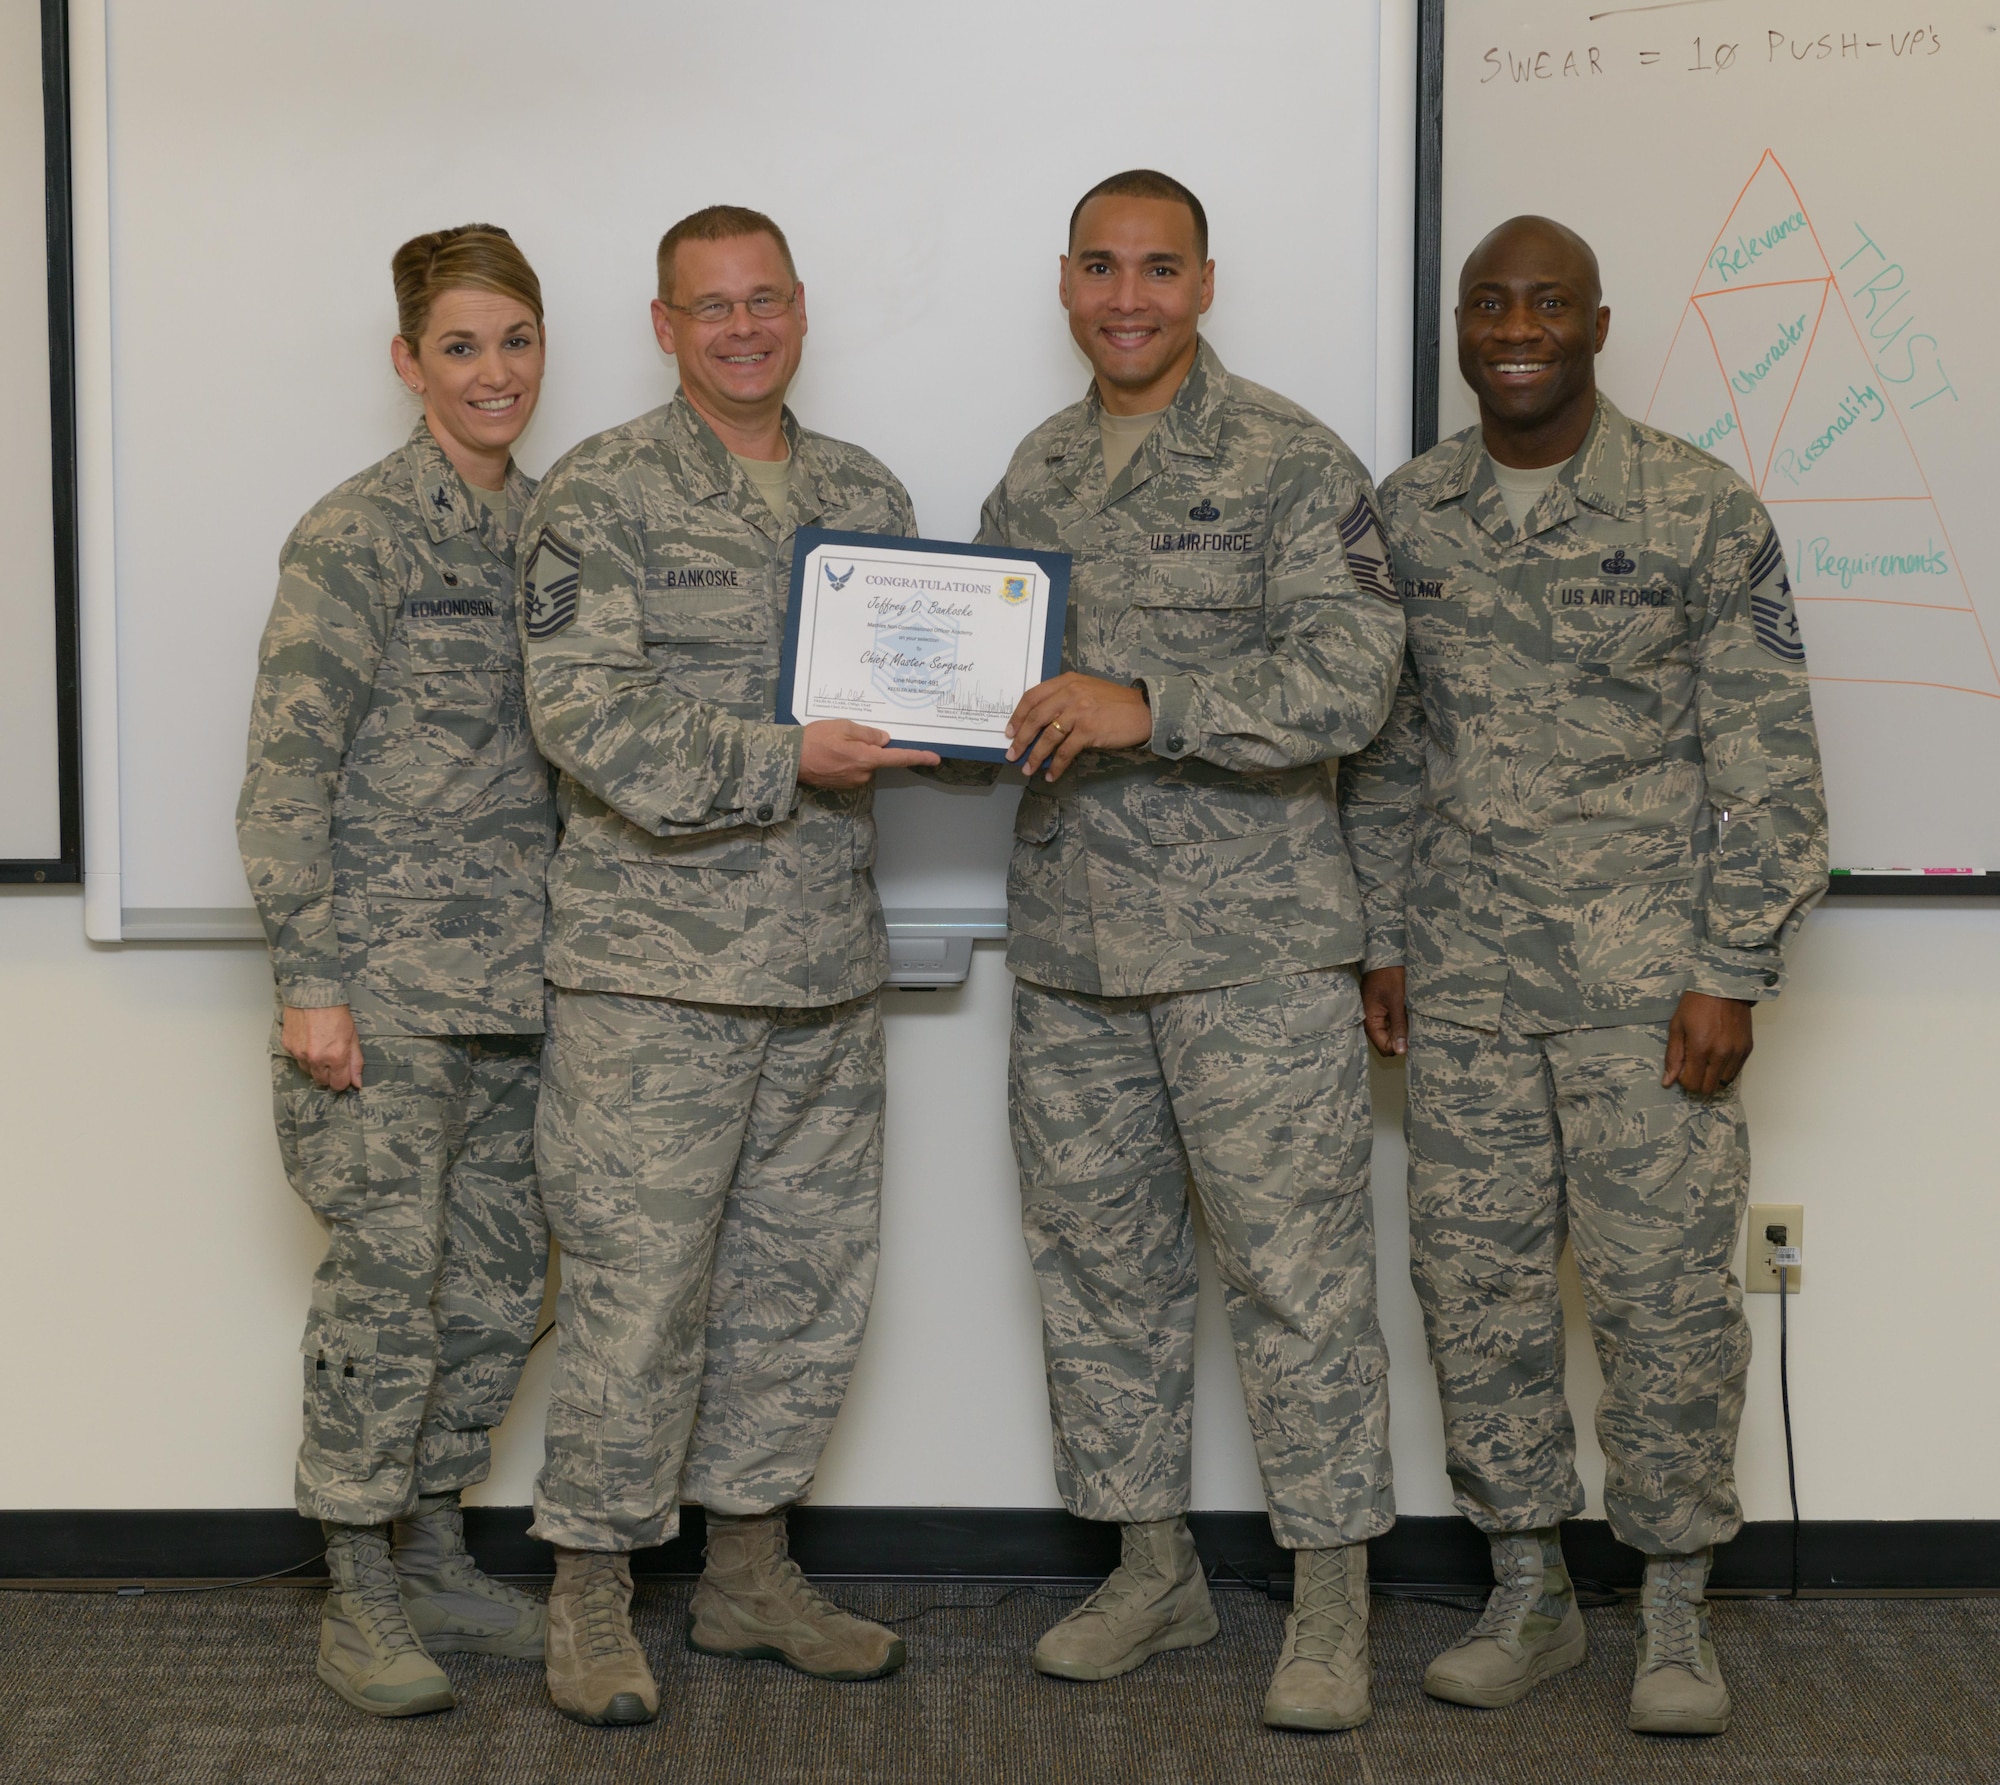 Col. Michele Edmondson, 81st Training Wing commander, Chief Master Sgt. Vegas Clark, 81st TRW command chief, and Chief Master Sgt. Rodney Deese II, Mathies NCO Academy commandant, congratulate Senior Master Sgt. Jeffrey Bankoske, Mathies NCOA director of education, on his selection to chief master sergeant at the Mathies NCOA Dec. 8, 2016, on Keesler Air Force Base, Miss. Base leadership visited the work centers of three Keesler senior NCOs to recognize and congratulate them on joining the top 1 percent of the Air Force’s enlisted force.  (U.S. Air Force photo by Andre’ Askew)